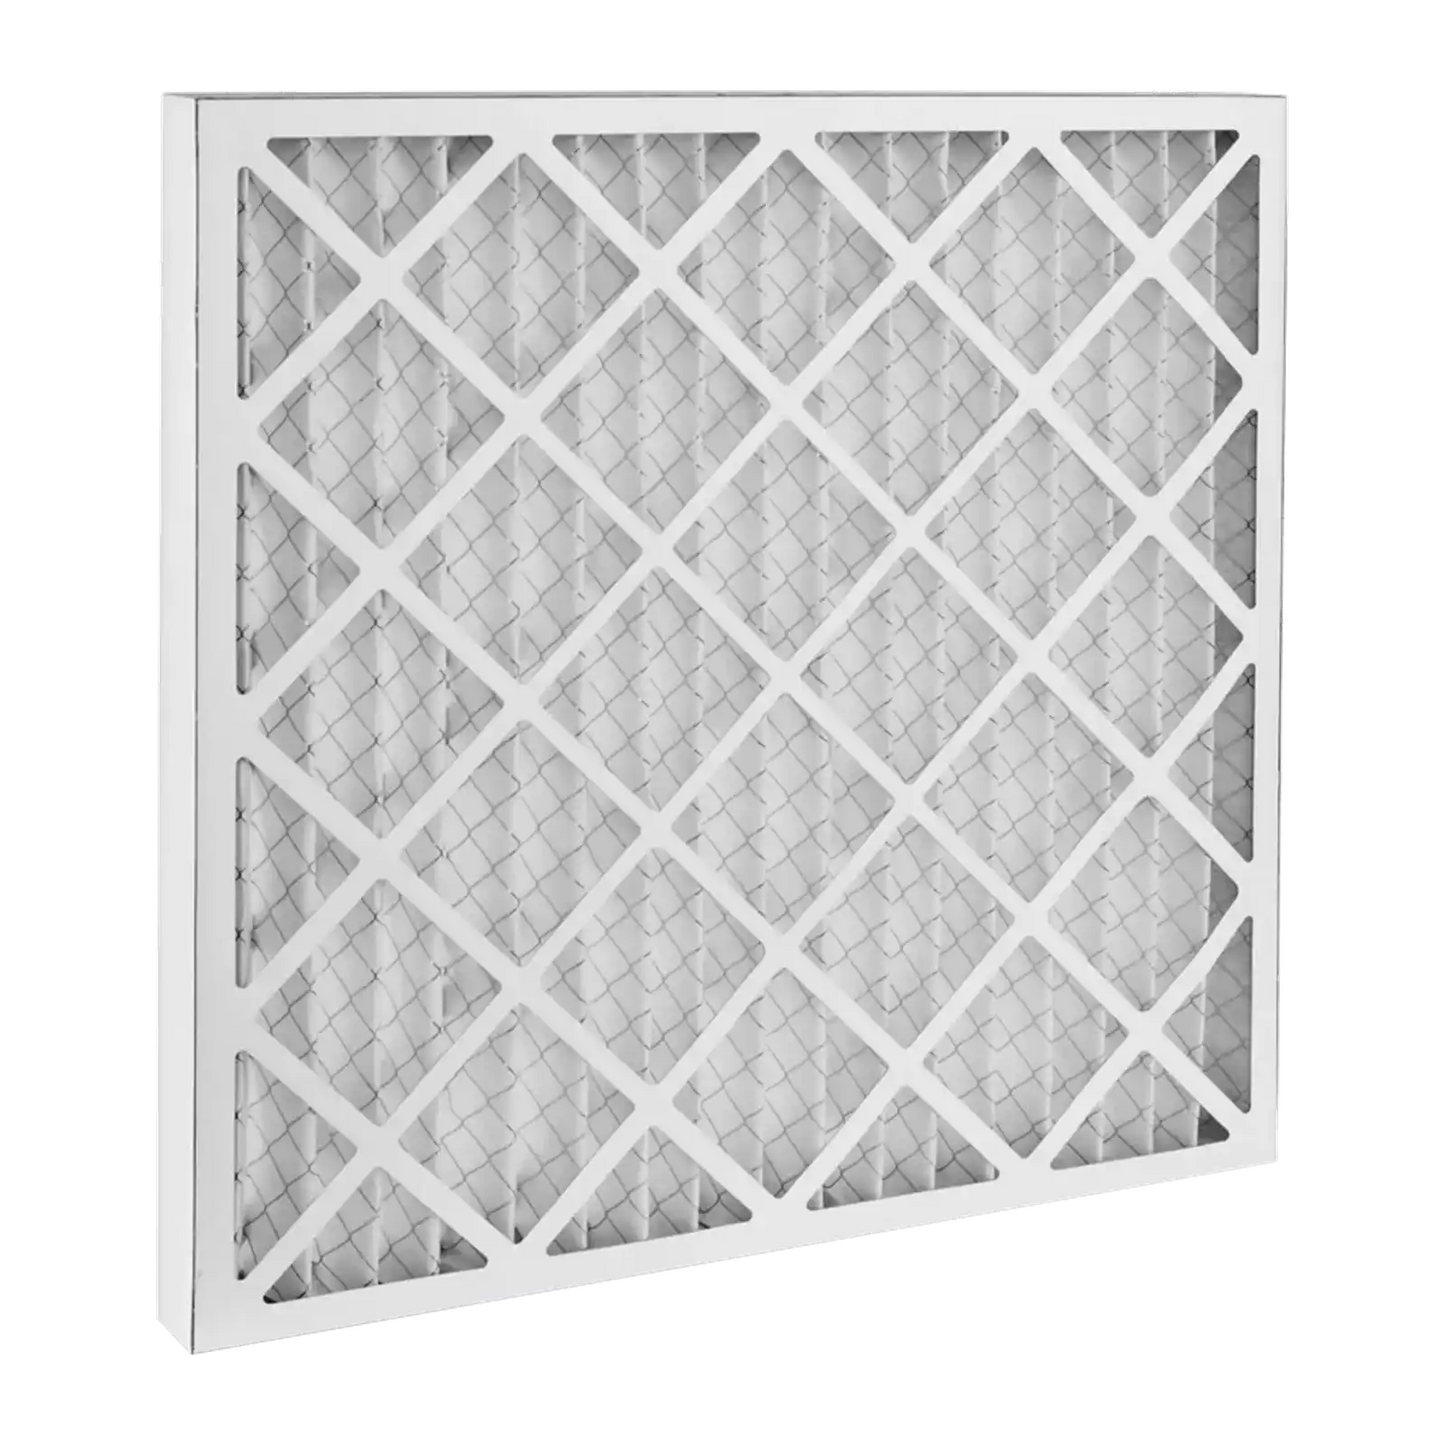 Dafco 12x12x1 Furnace AC Filter - Case of 12